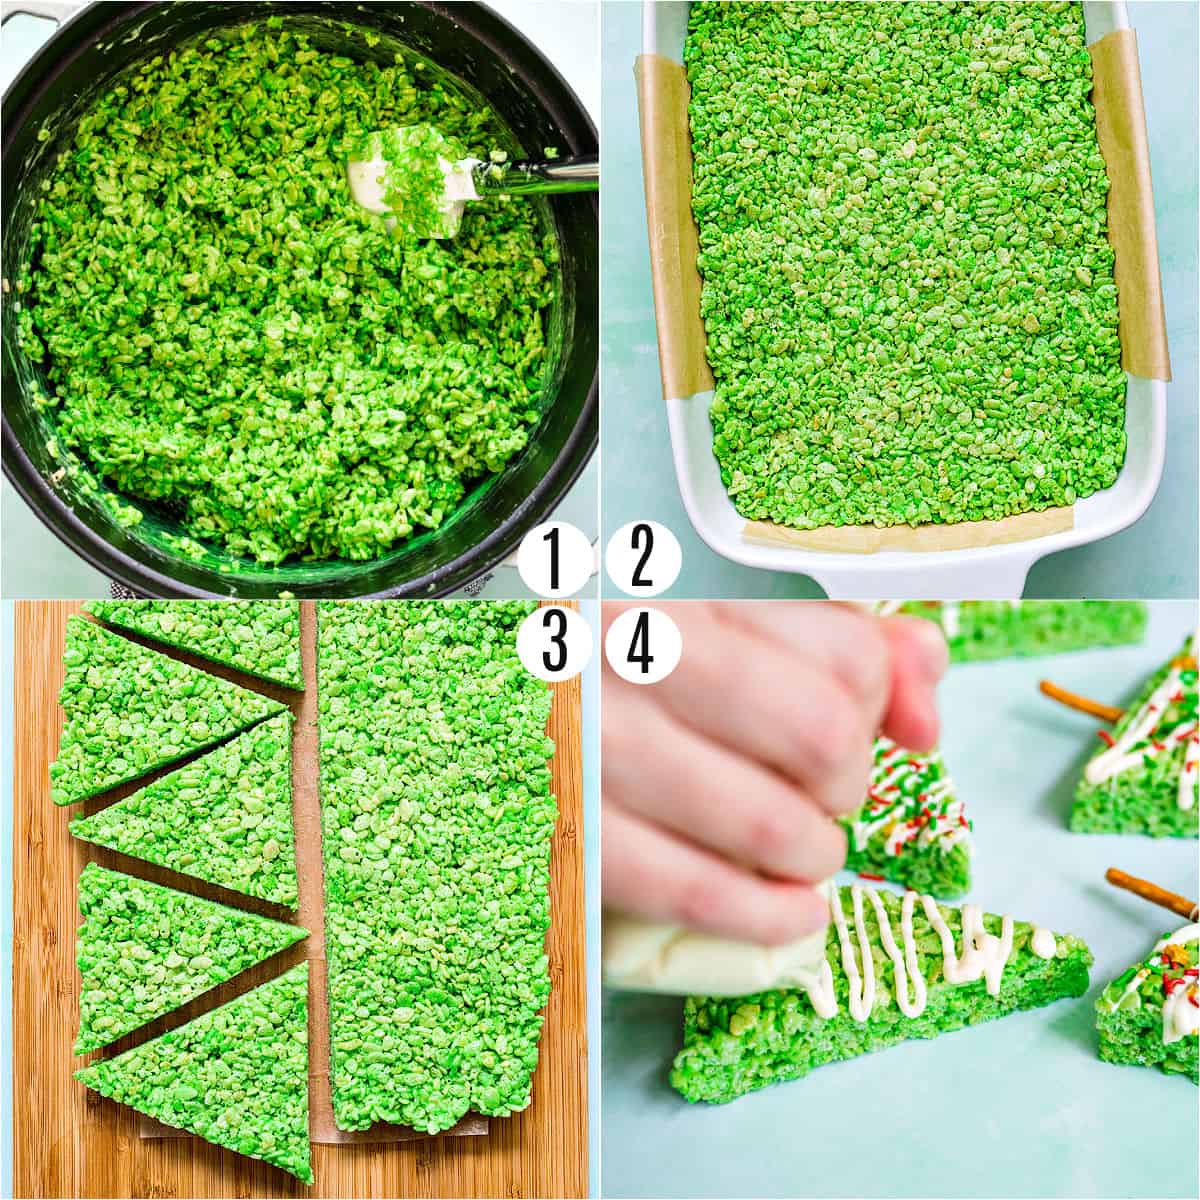 Step by step photos showing how to make Christmas rice krispie treats.